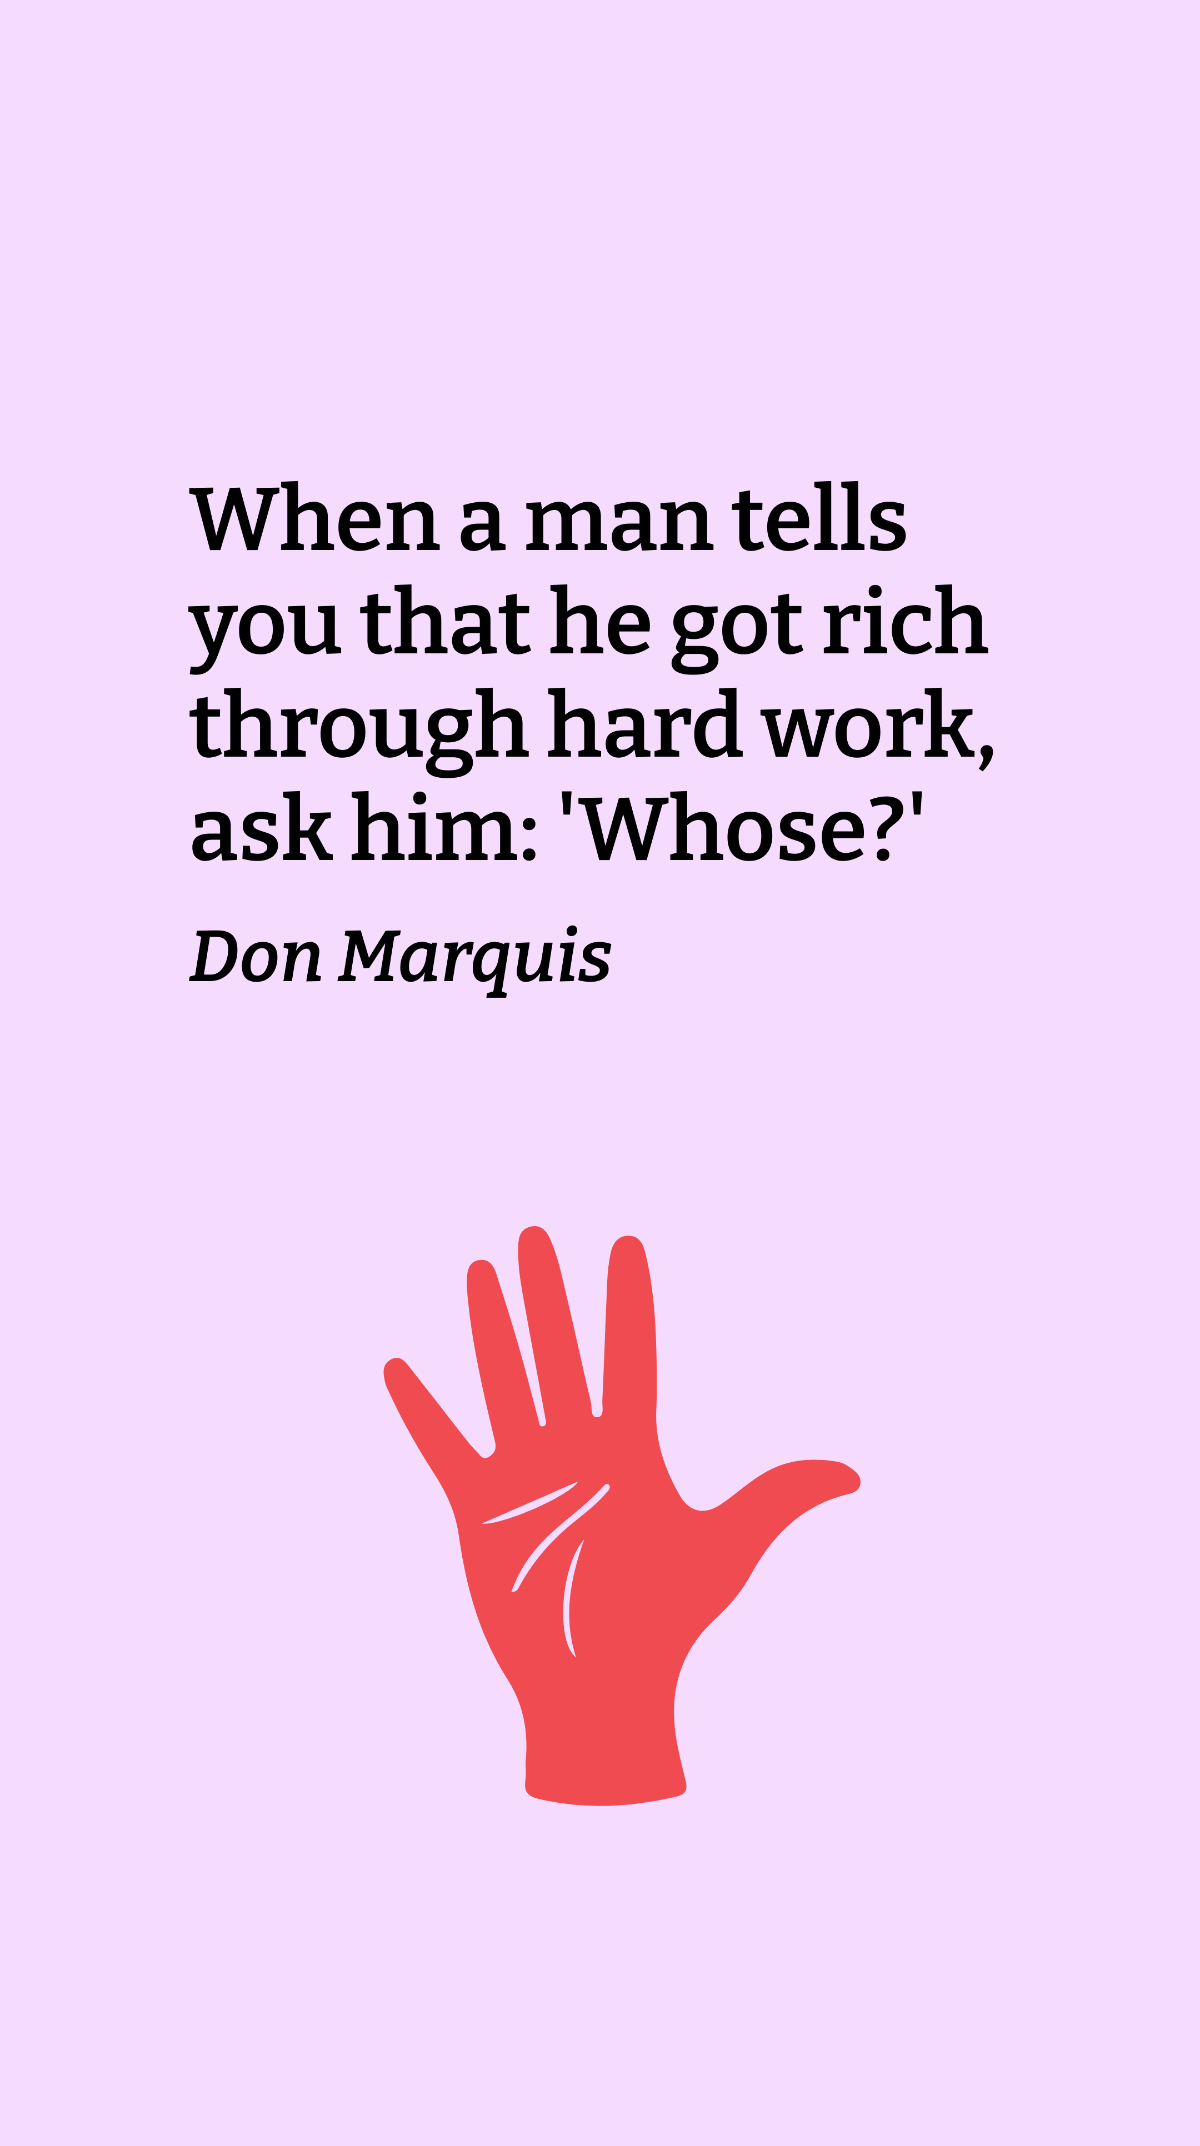 Free Don Marquis - When a man tells you that he got rich through hard work, ask him: 'Whose?' Template